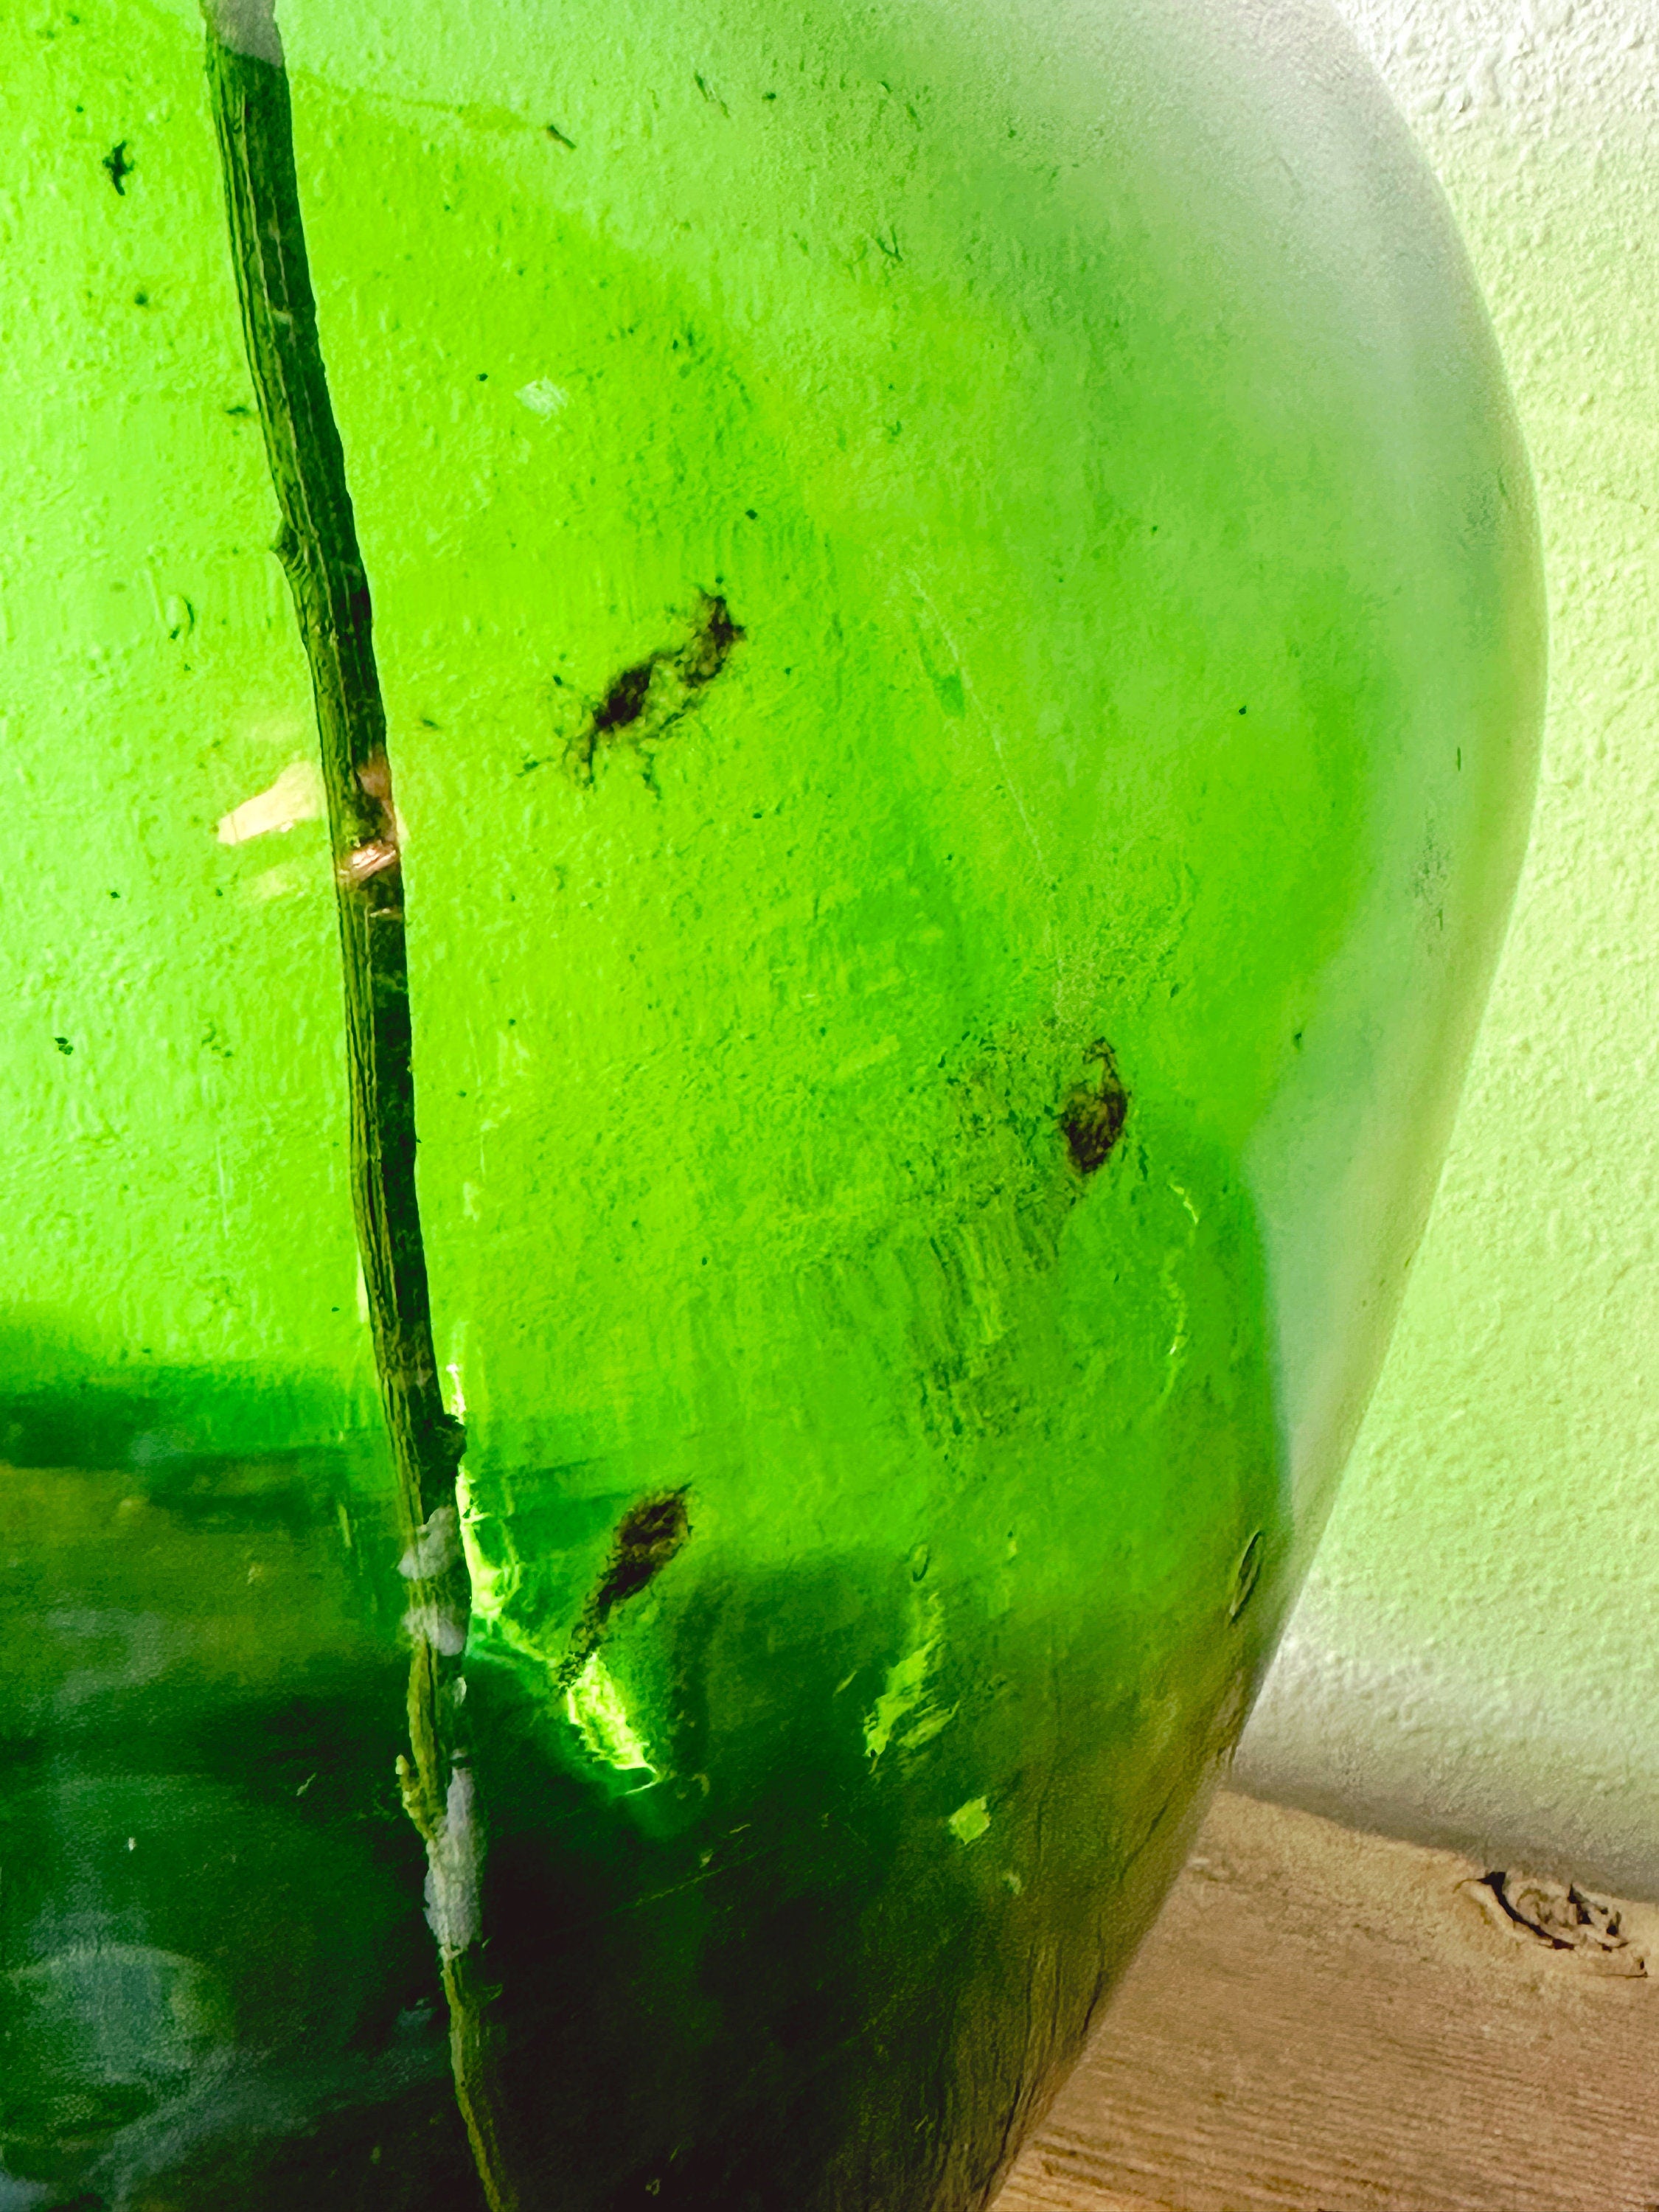 Vintage Hand Blown Large Green Glass Demijohn | French Glass Wine Jug Home Decor